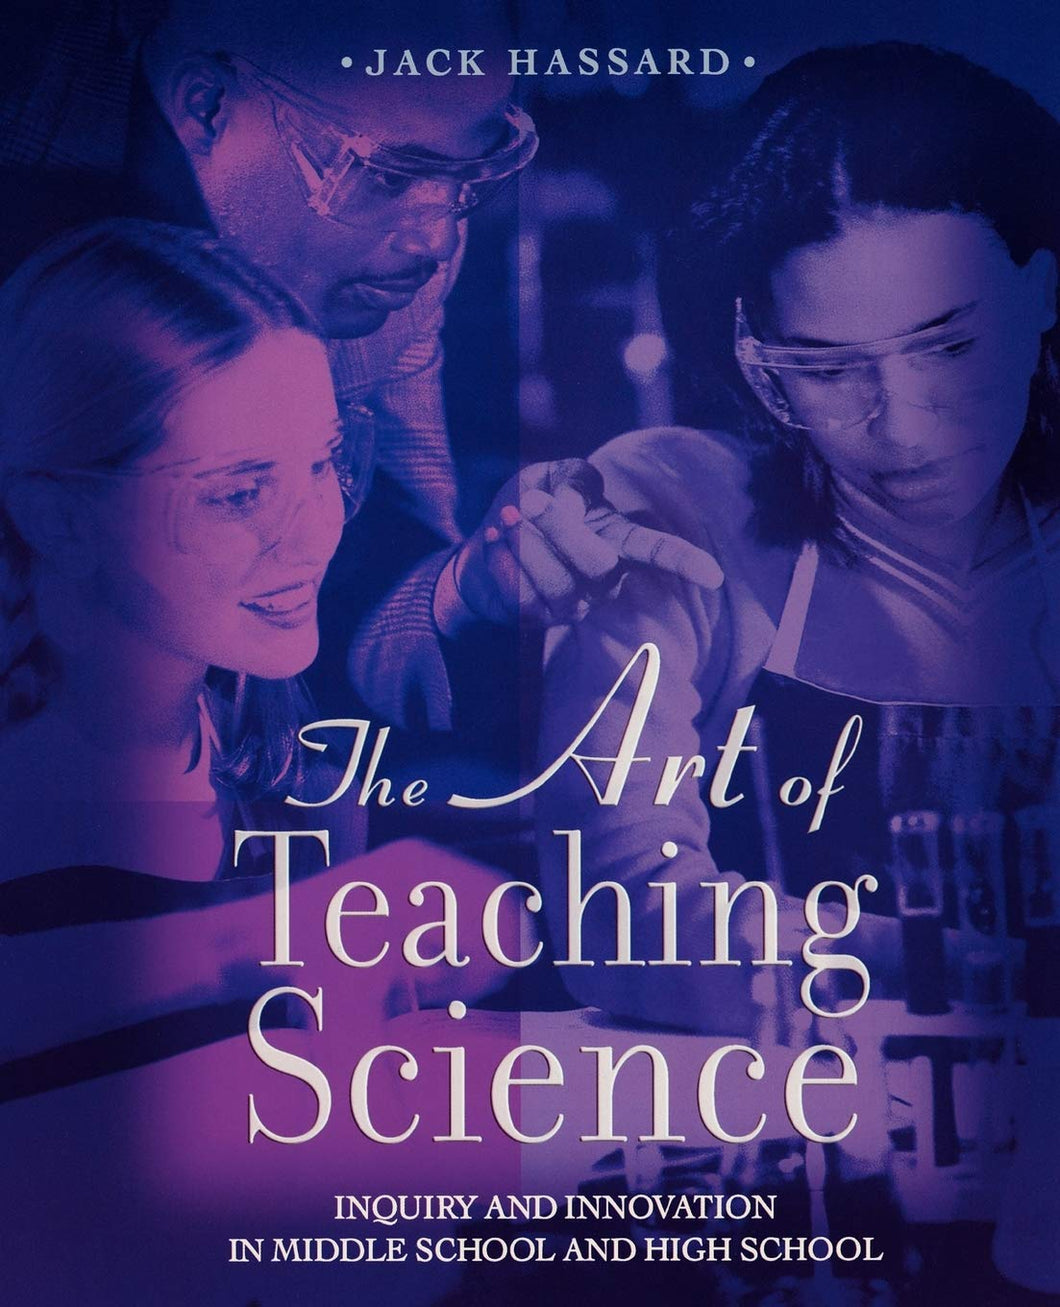 The Art of Teaching Science: Inquiry and Innovation in Middle School and High School [Paperback] 1e by Jack Hassard